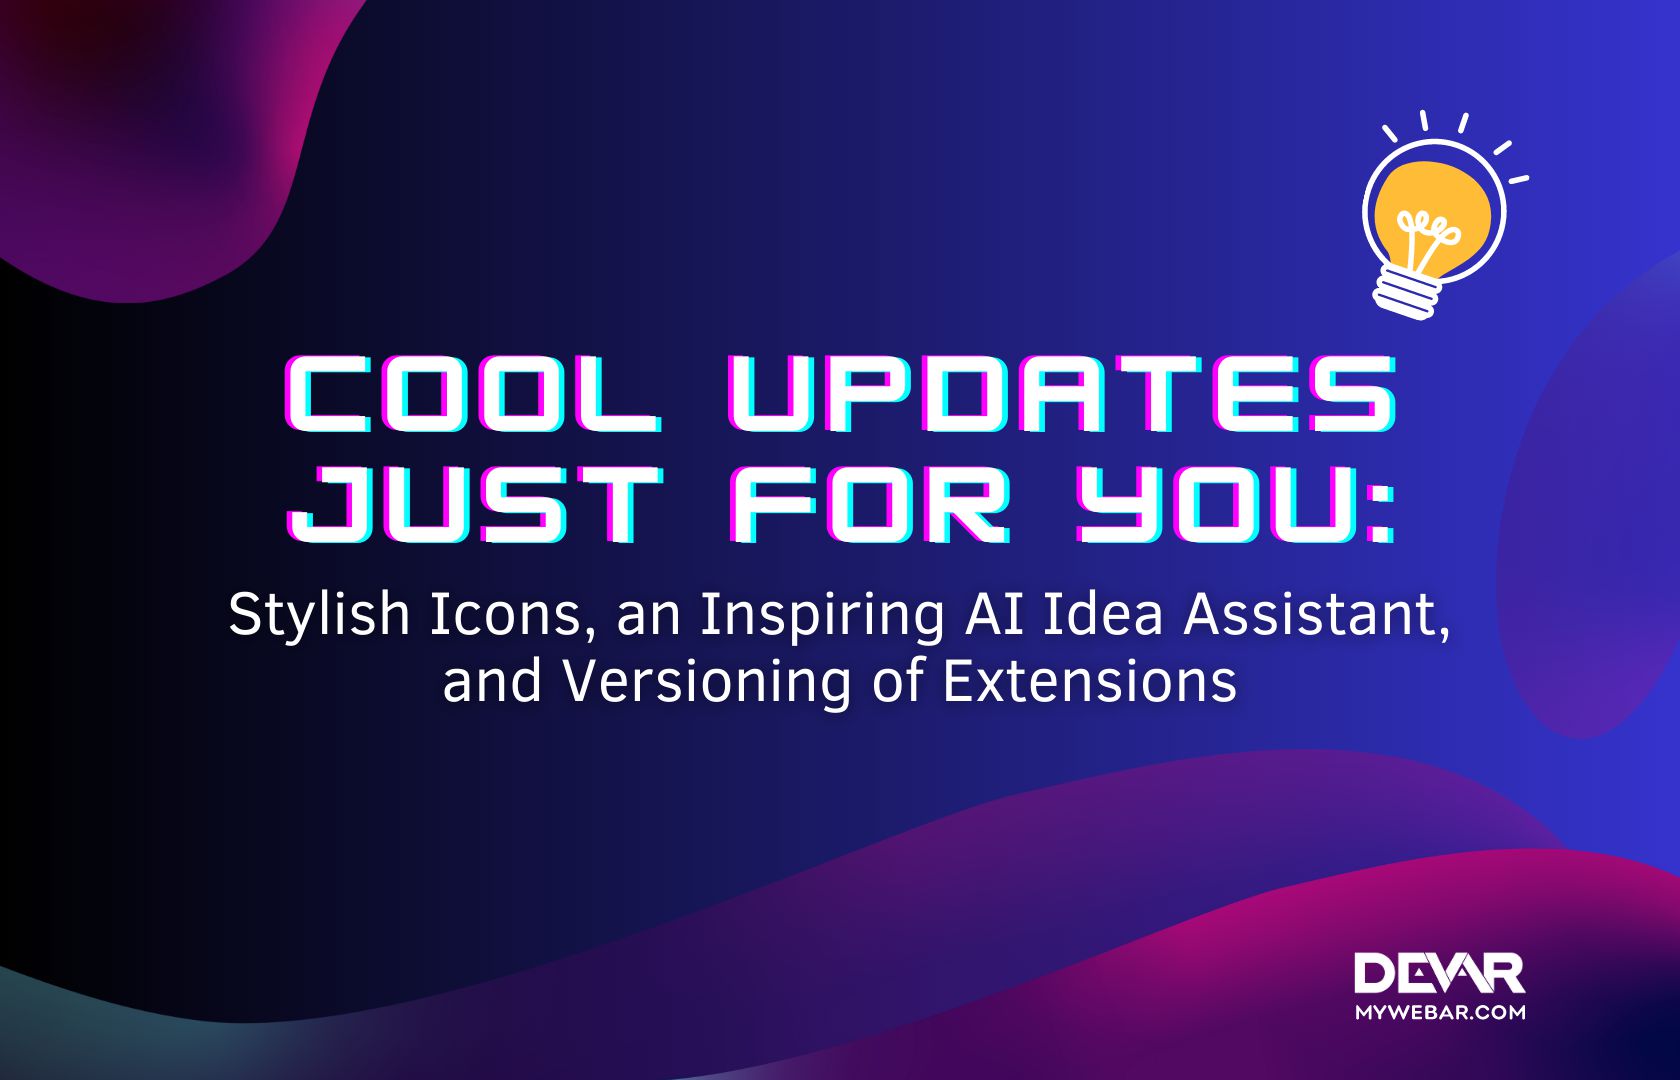 Cool Updates Just for You: Stylish Icons, an Inspiring AI Idea Assistant, and Versioning of Extensions